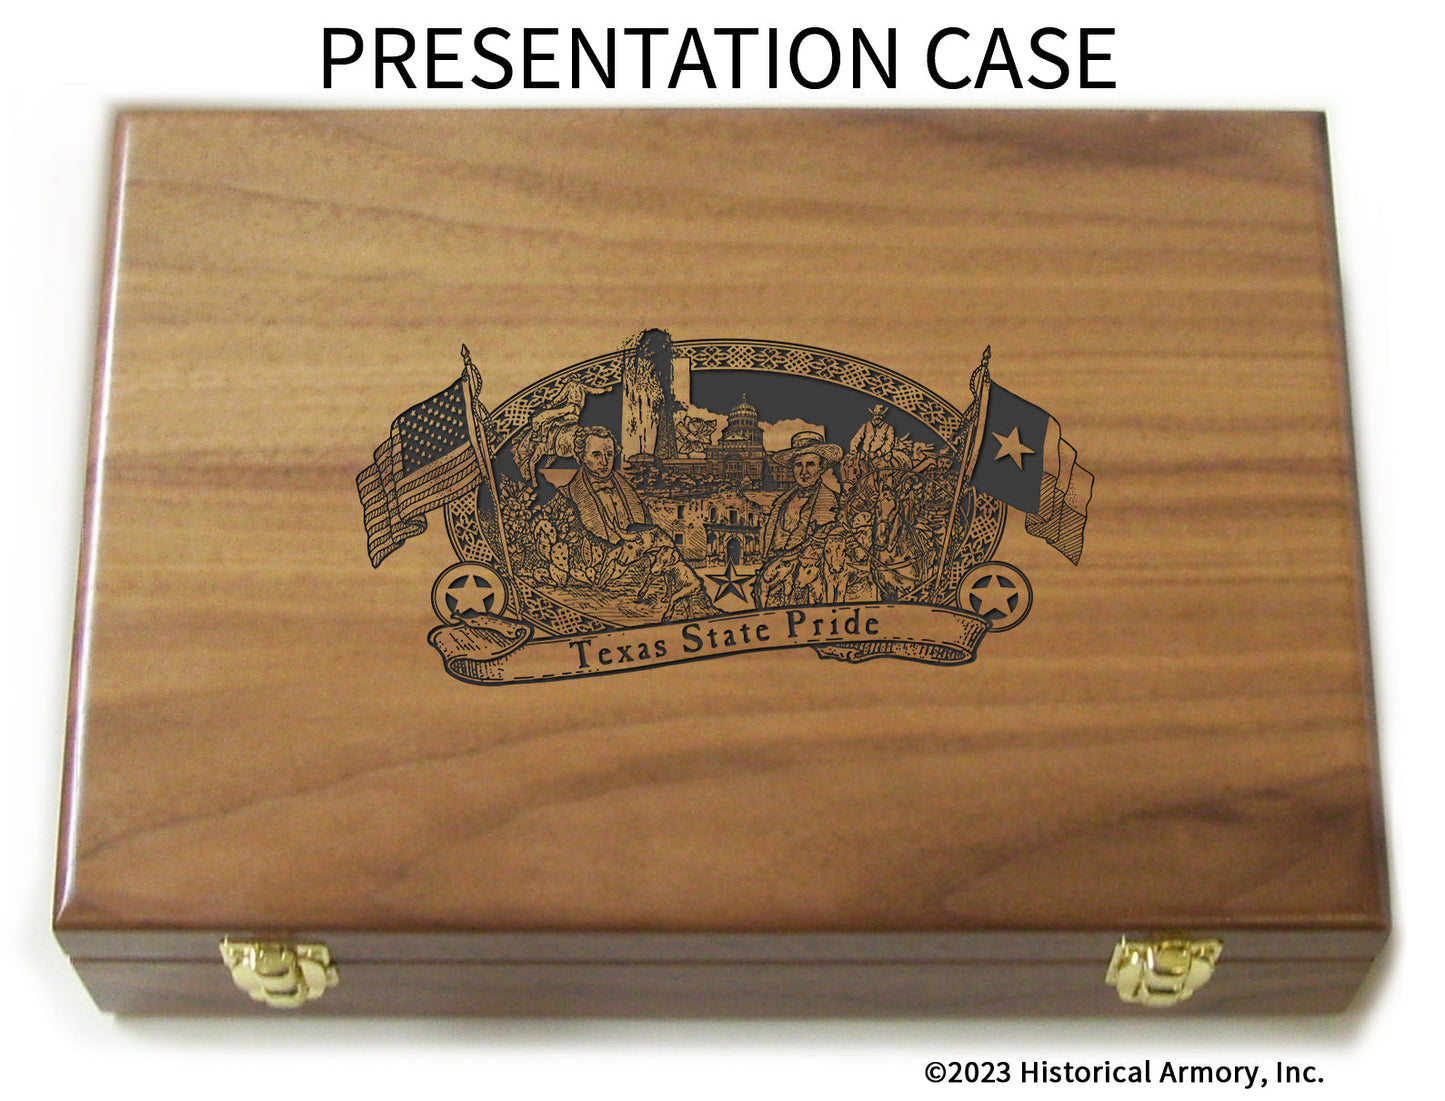 Texas State Pride Limited Edition Engraved 1911 Presentation Case